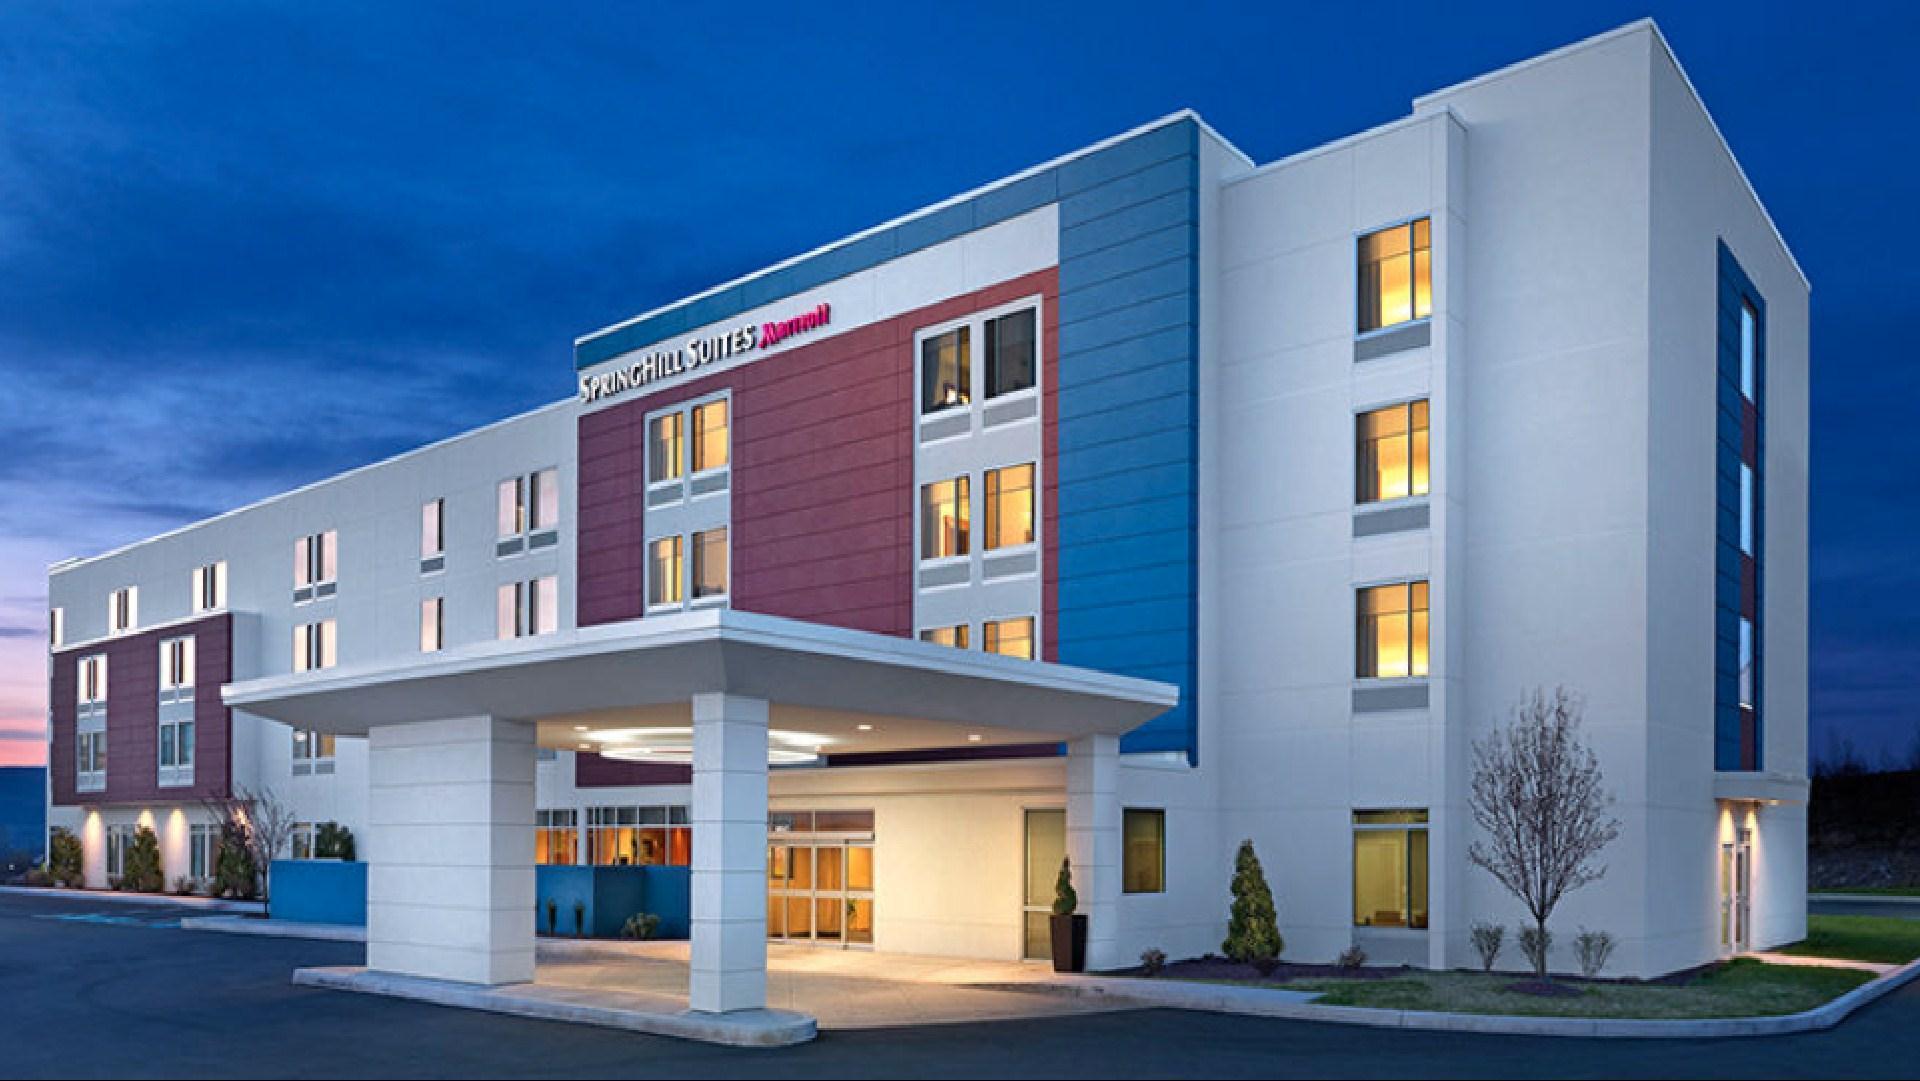 SpringHill Suites Baltimore White Marsh/Middle River in Middle River, MD